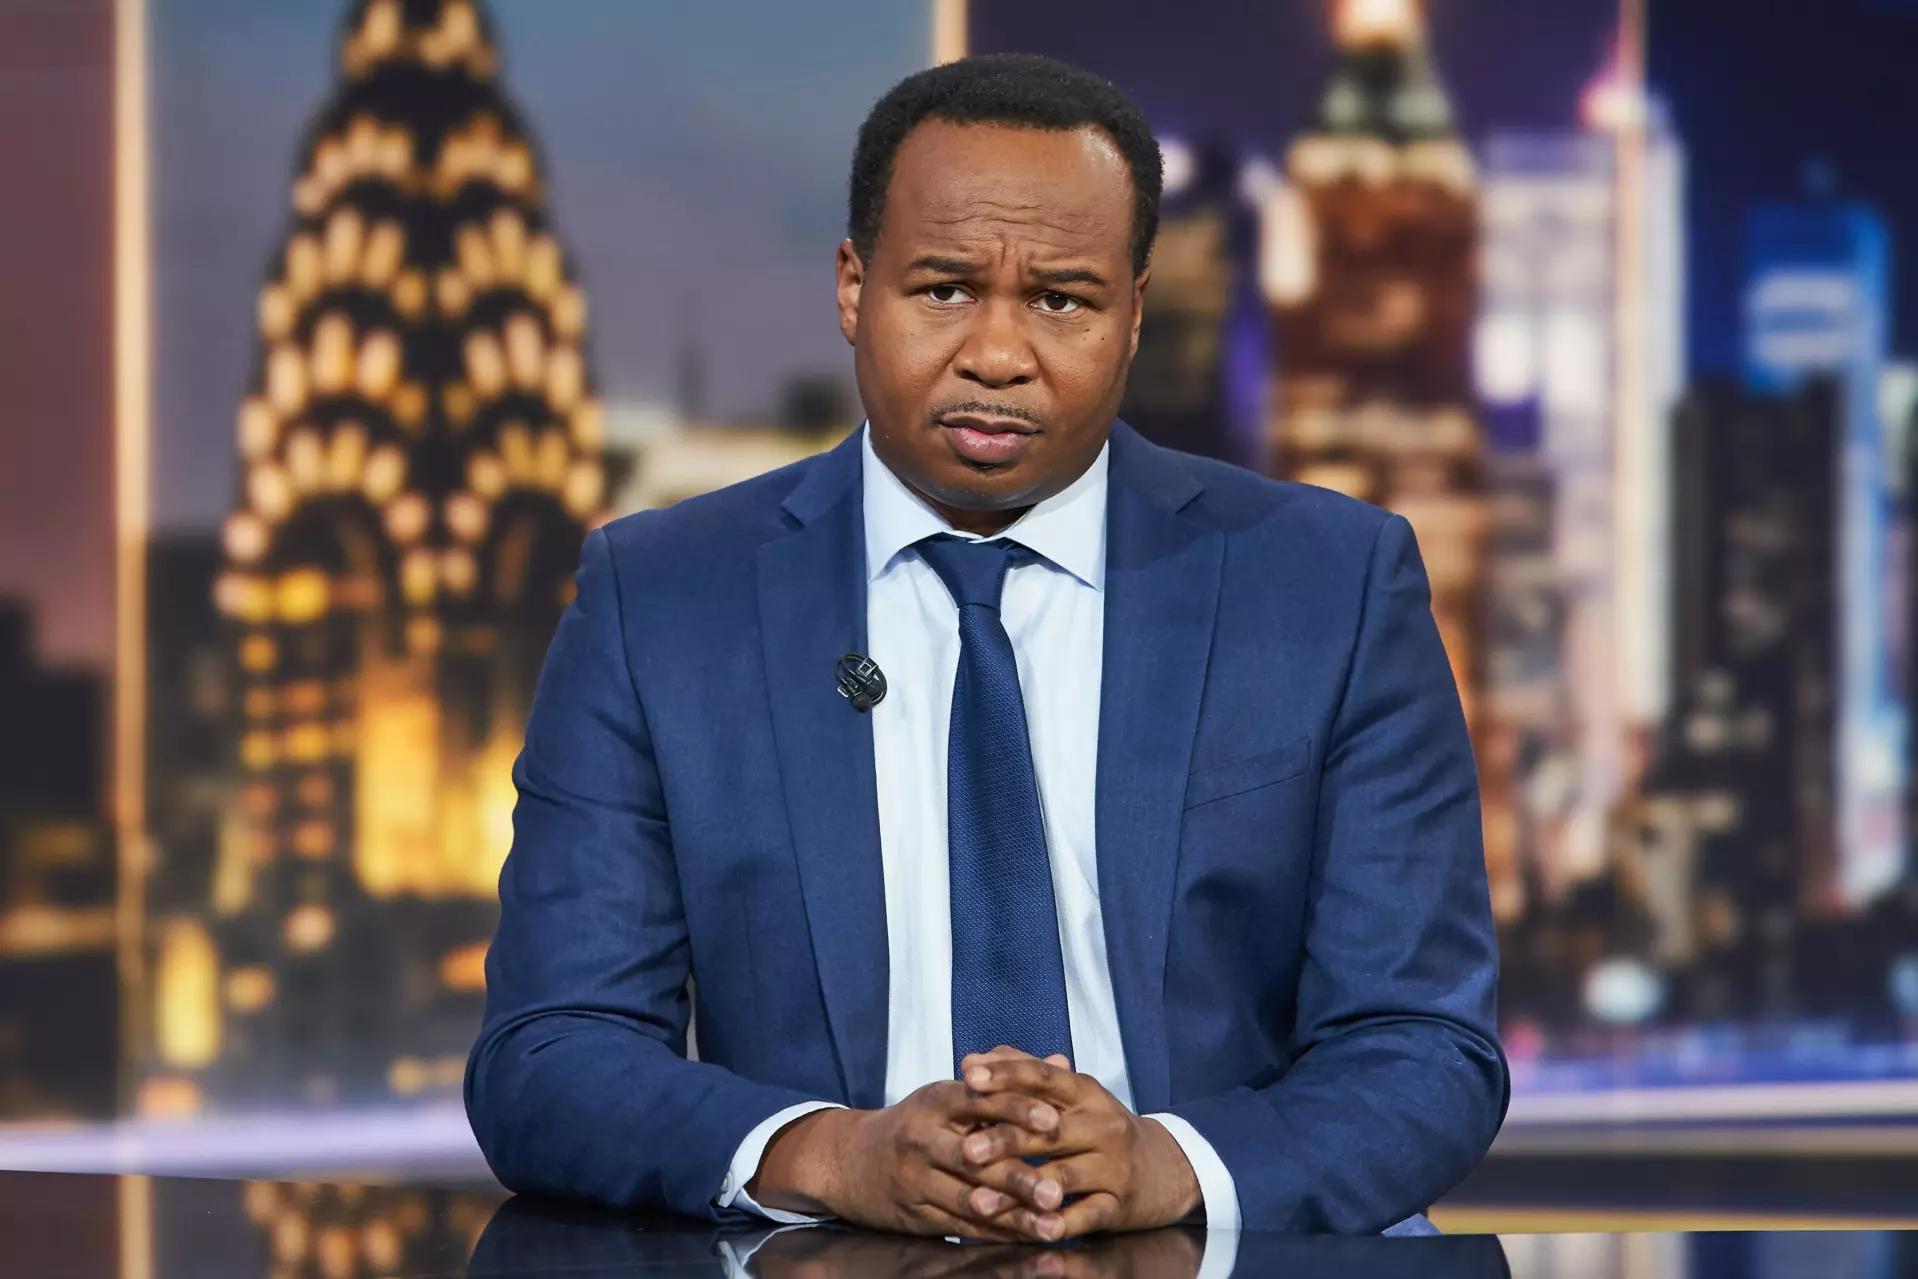 Roy Wood Jr. faces controversy over political views